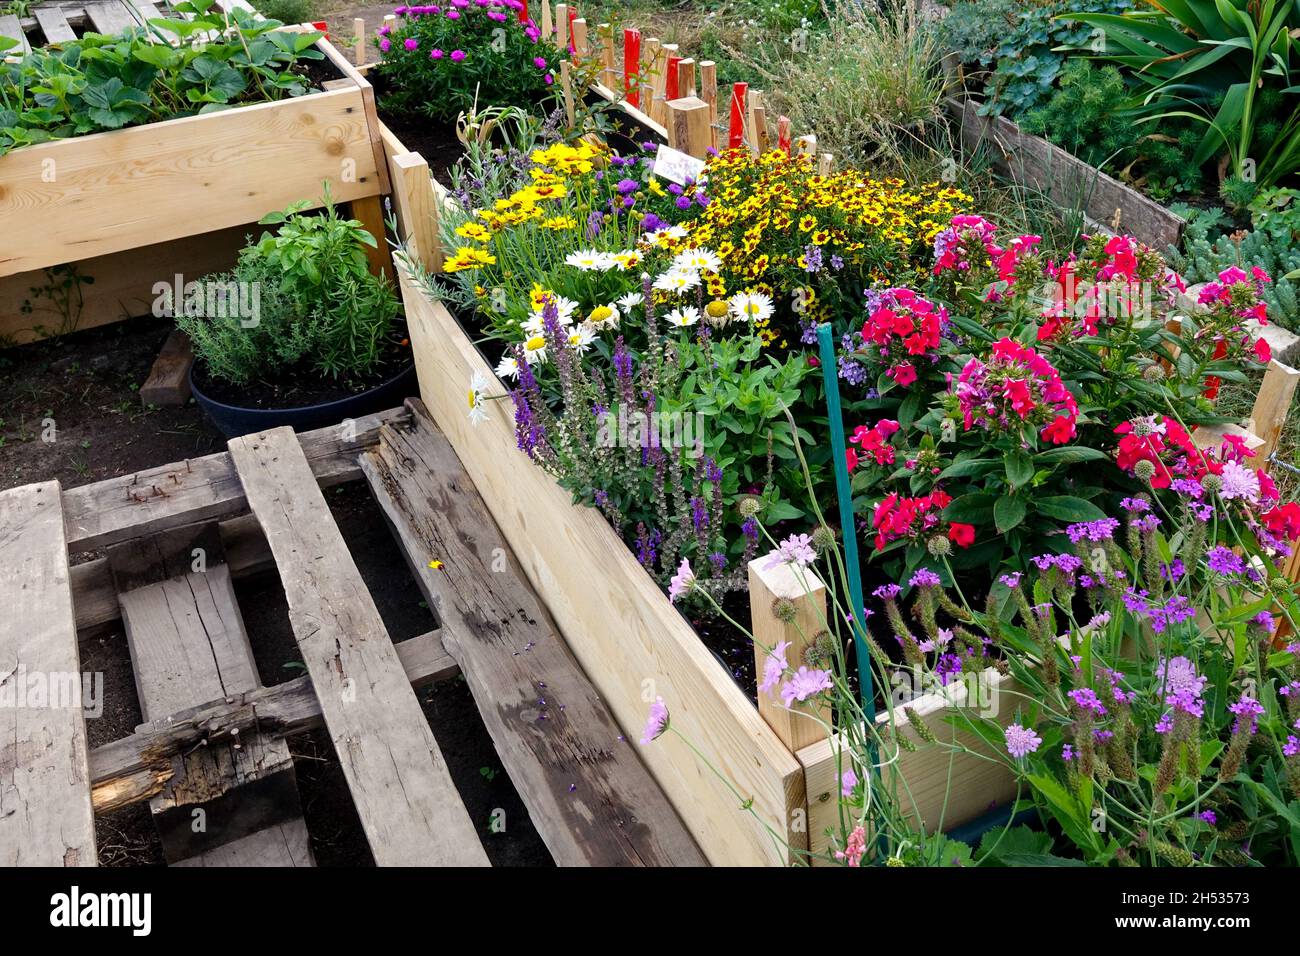 Community garden gardening city urban flowers in bed, wooden pallets, pallet wood raised bed flowers Stock Photo